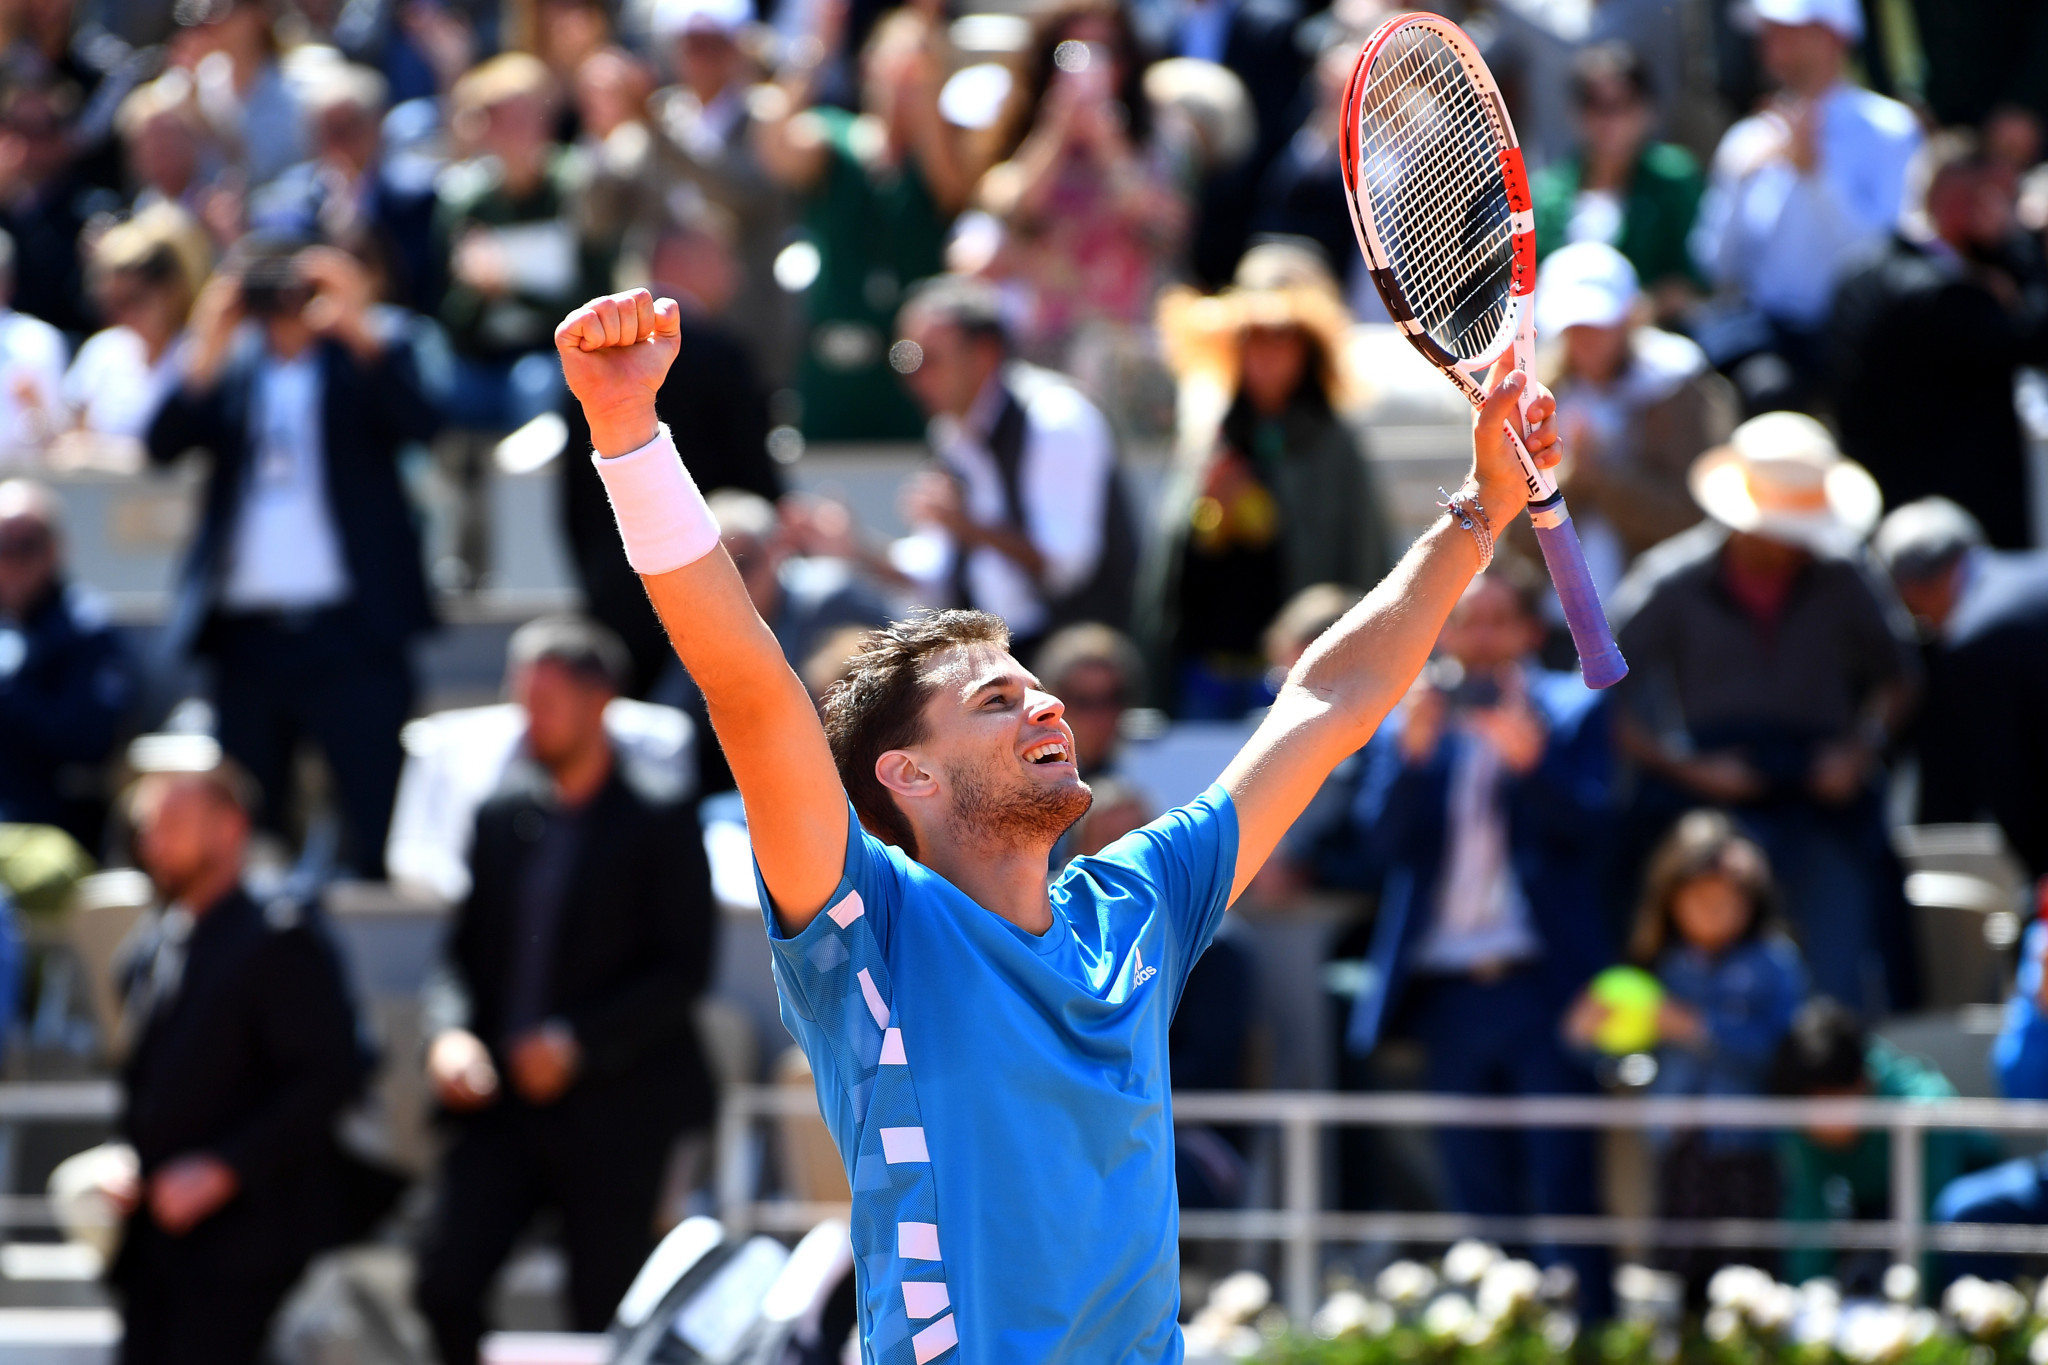 There was elation for Thiem as he sealed a place in tomorrow's French Open final against Spaniard Rafael Nadal ©Getty Images